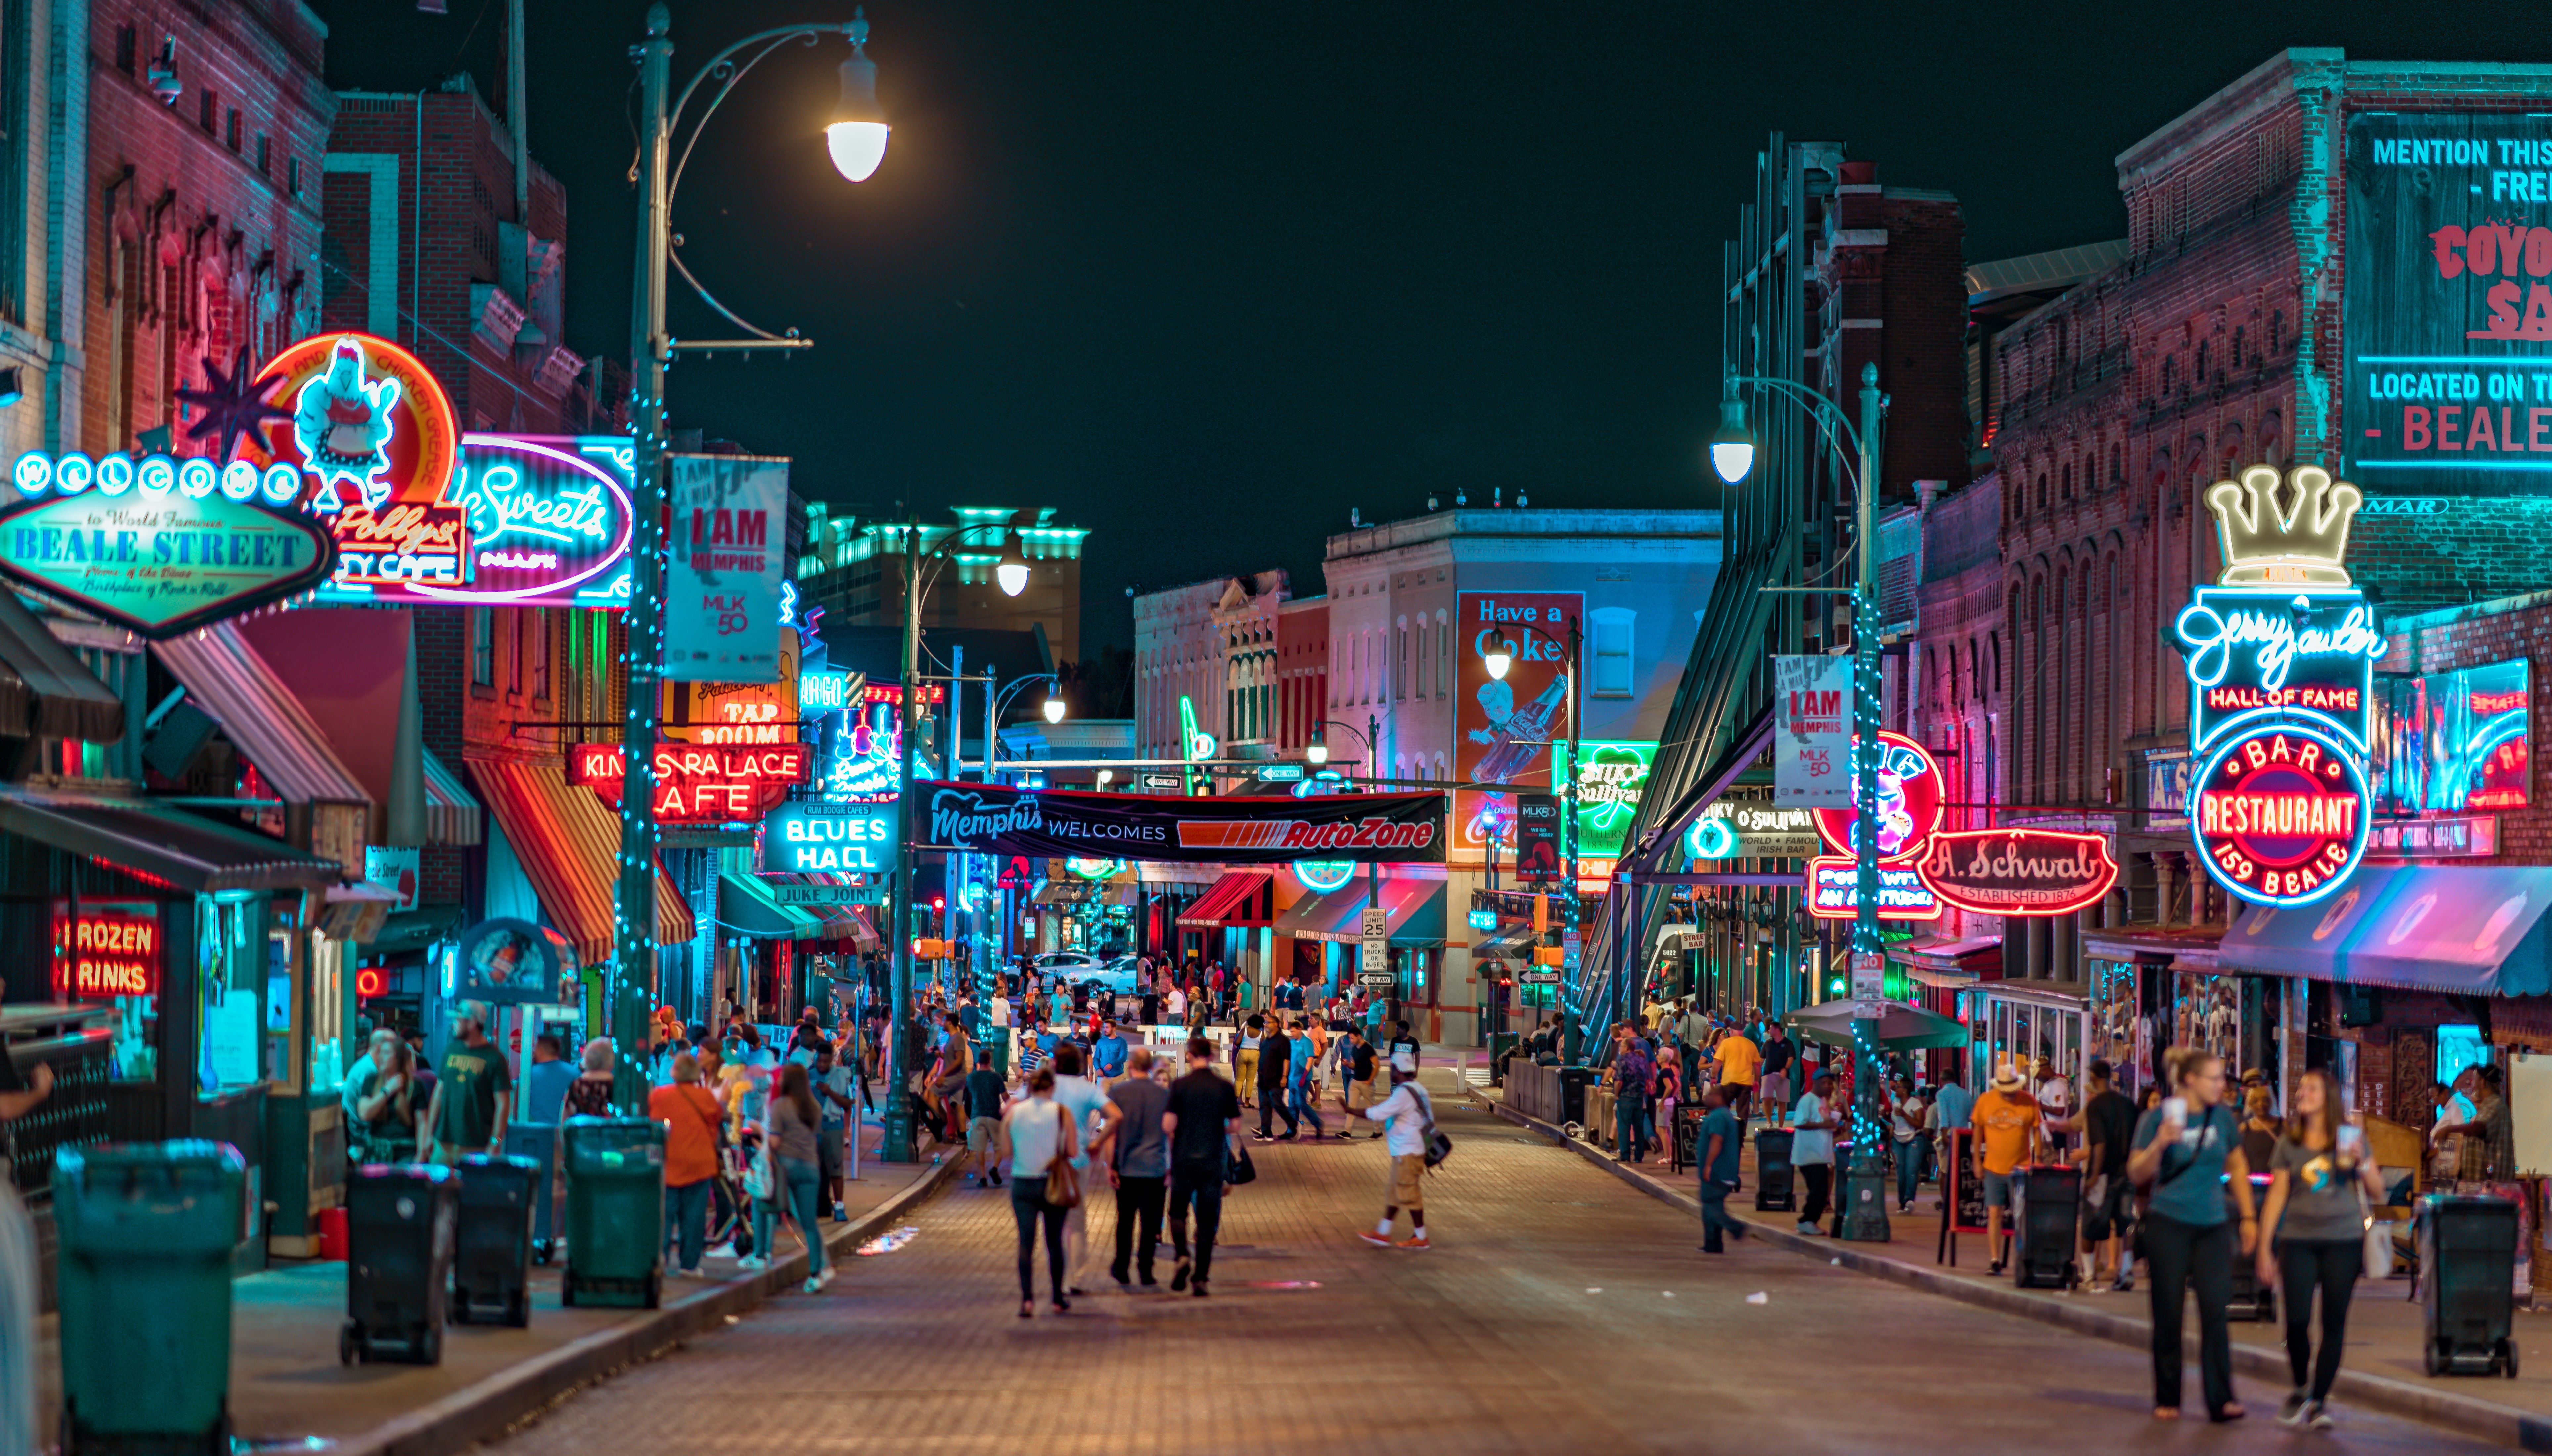 Evening on a busy Beale Street in Memphis